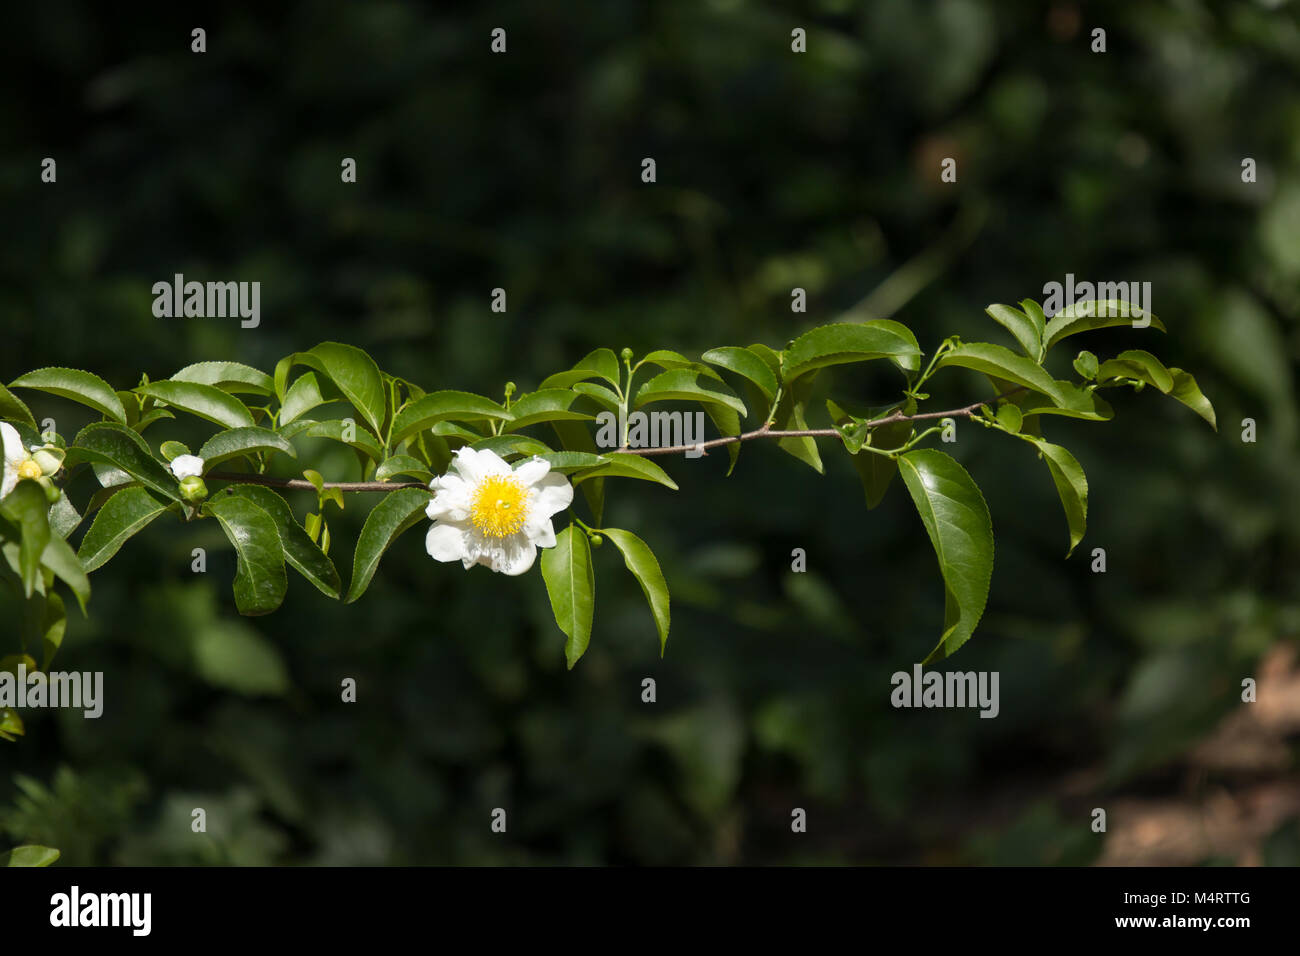 White and Yellow flower  name is Fried Egg Tree or  Oncoba spinosa Forssk. Stock Photo